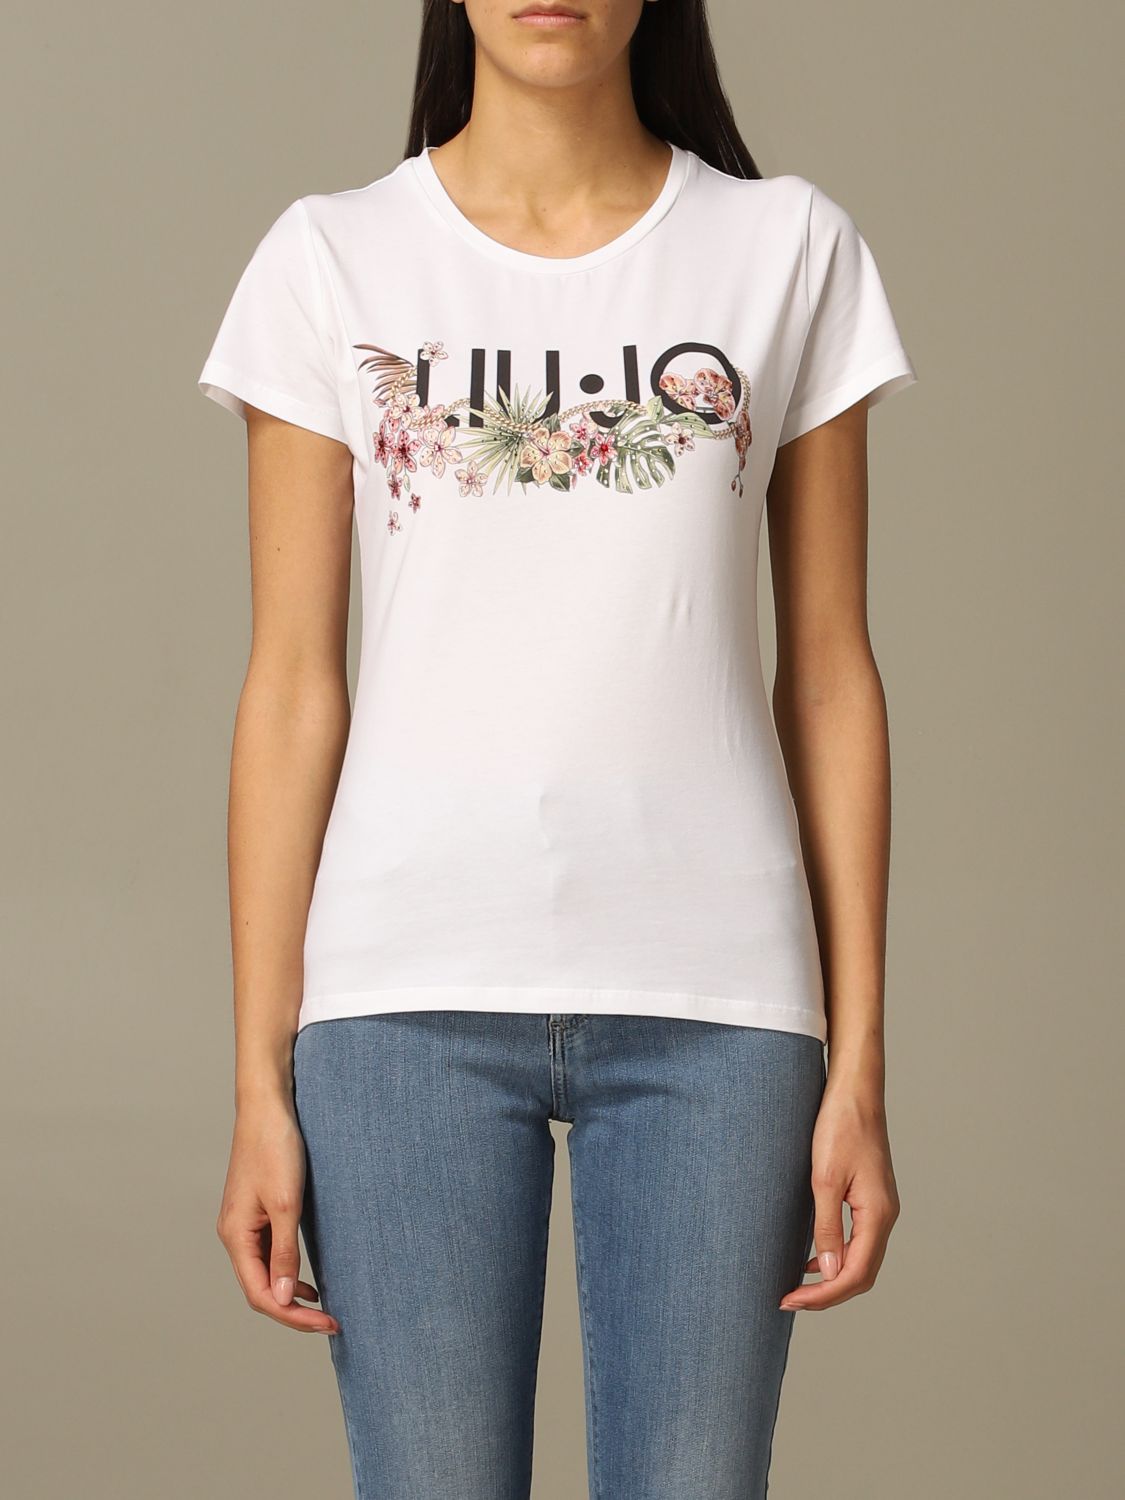 Practical First notice Liu Jo Outlet: t-shirt with floral print and logo - White | Liu Jo t-shirt  FA0422J5003 online on GIGLIO.COM